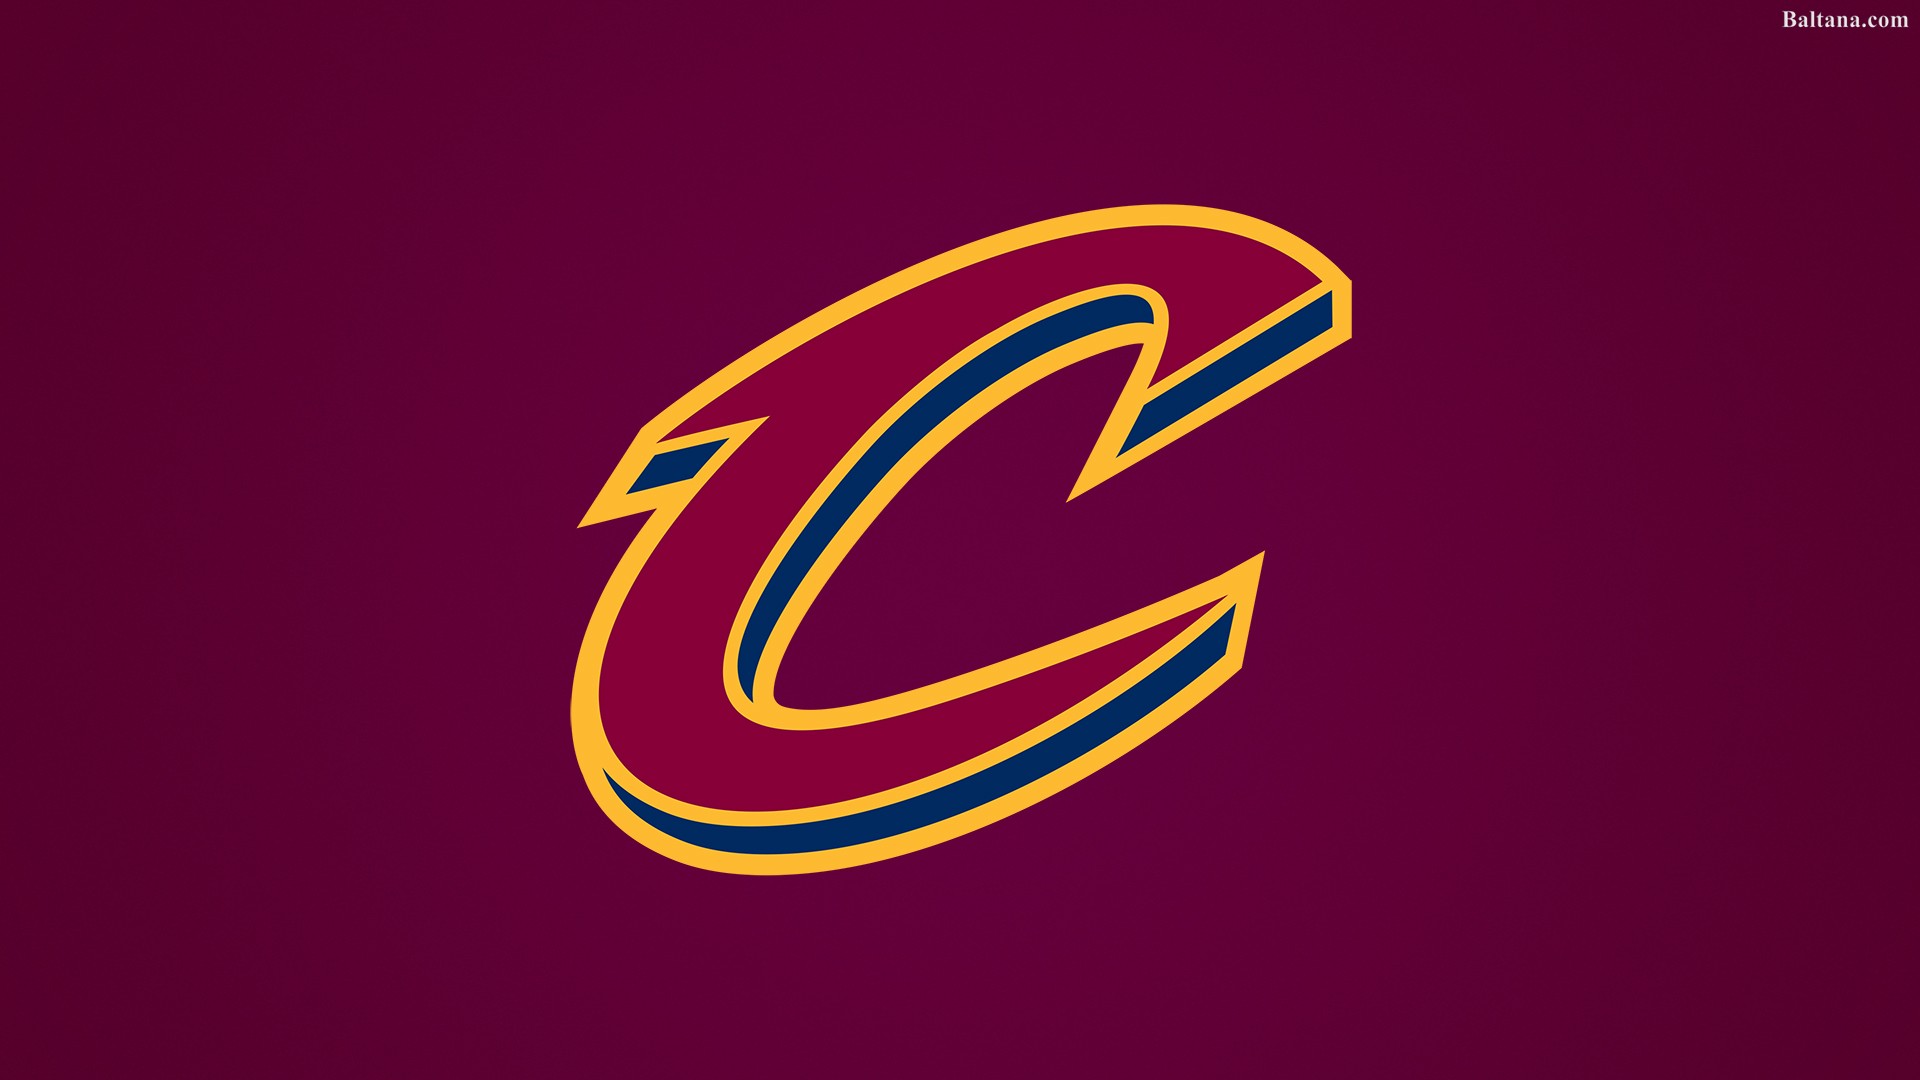 Cleveland Cavaliers Wallpaper Cleveland Cavaliers Logo 2590061 Hd Wallpaper Backgrounds Download